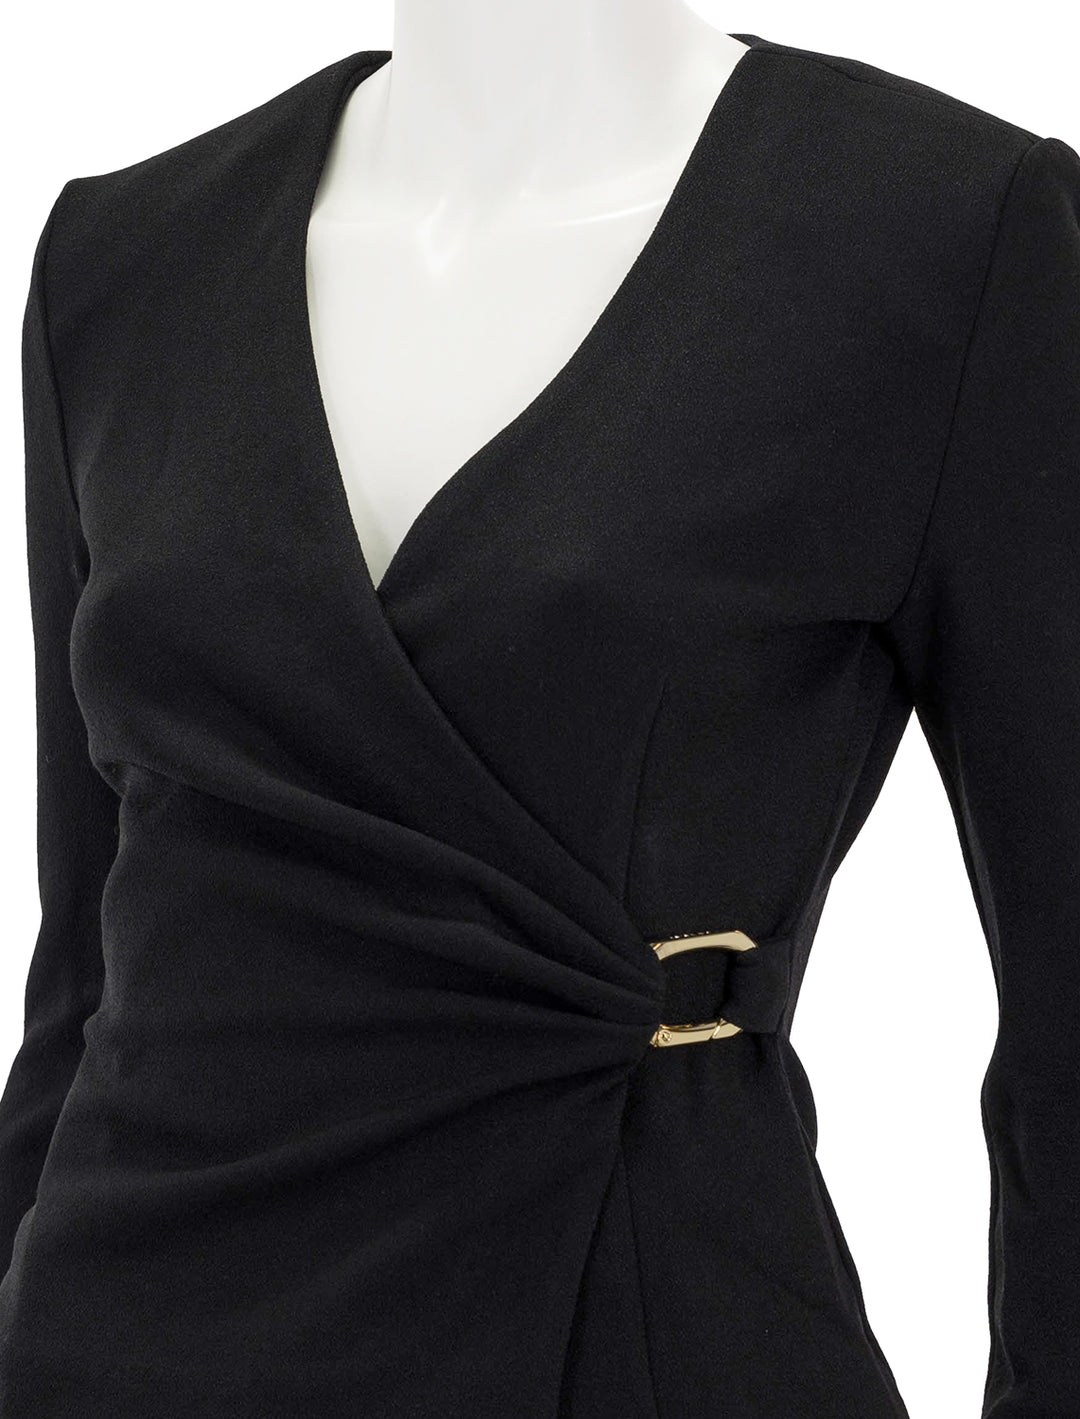 Close-up view of Anine Bing's joey top in black.